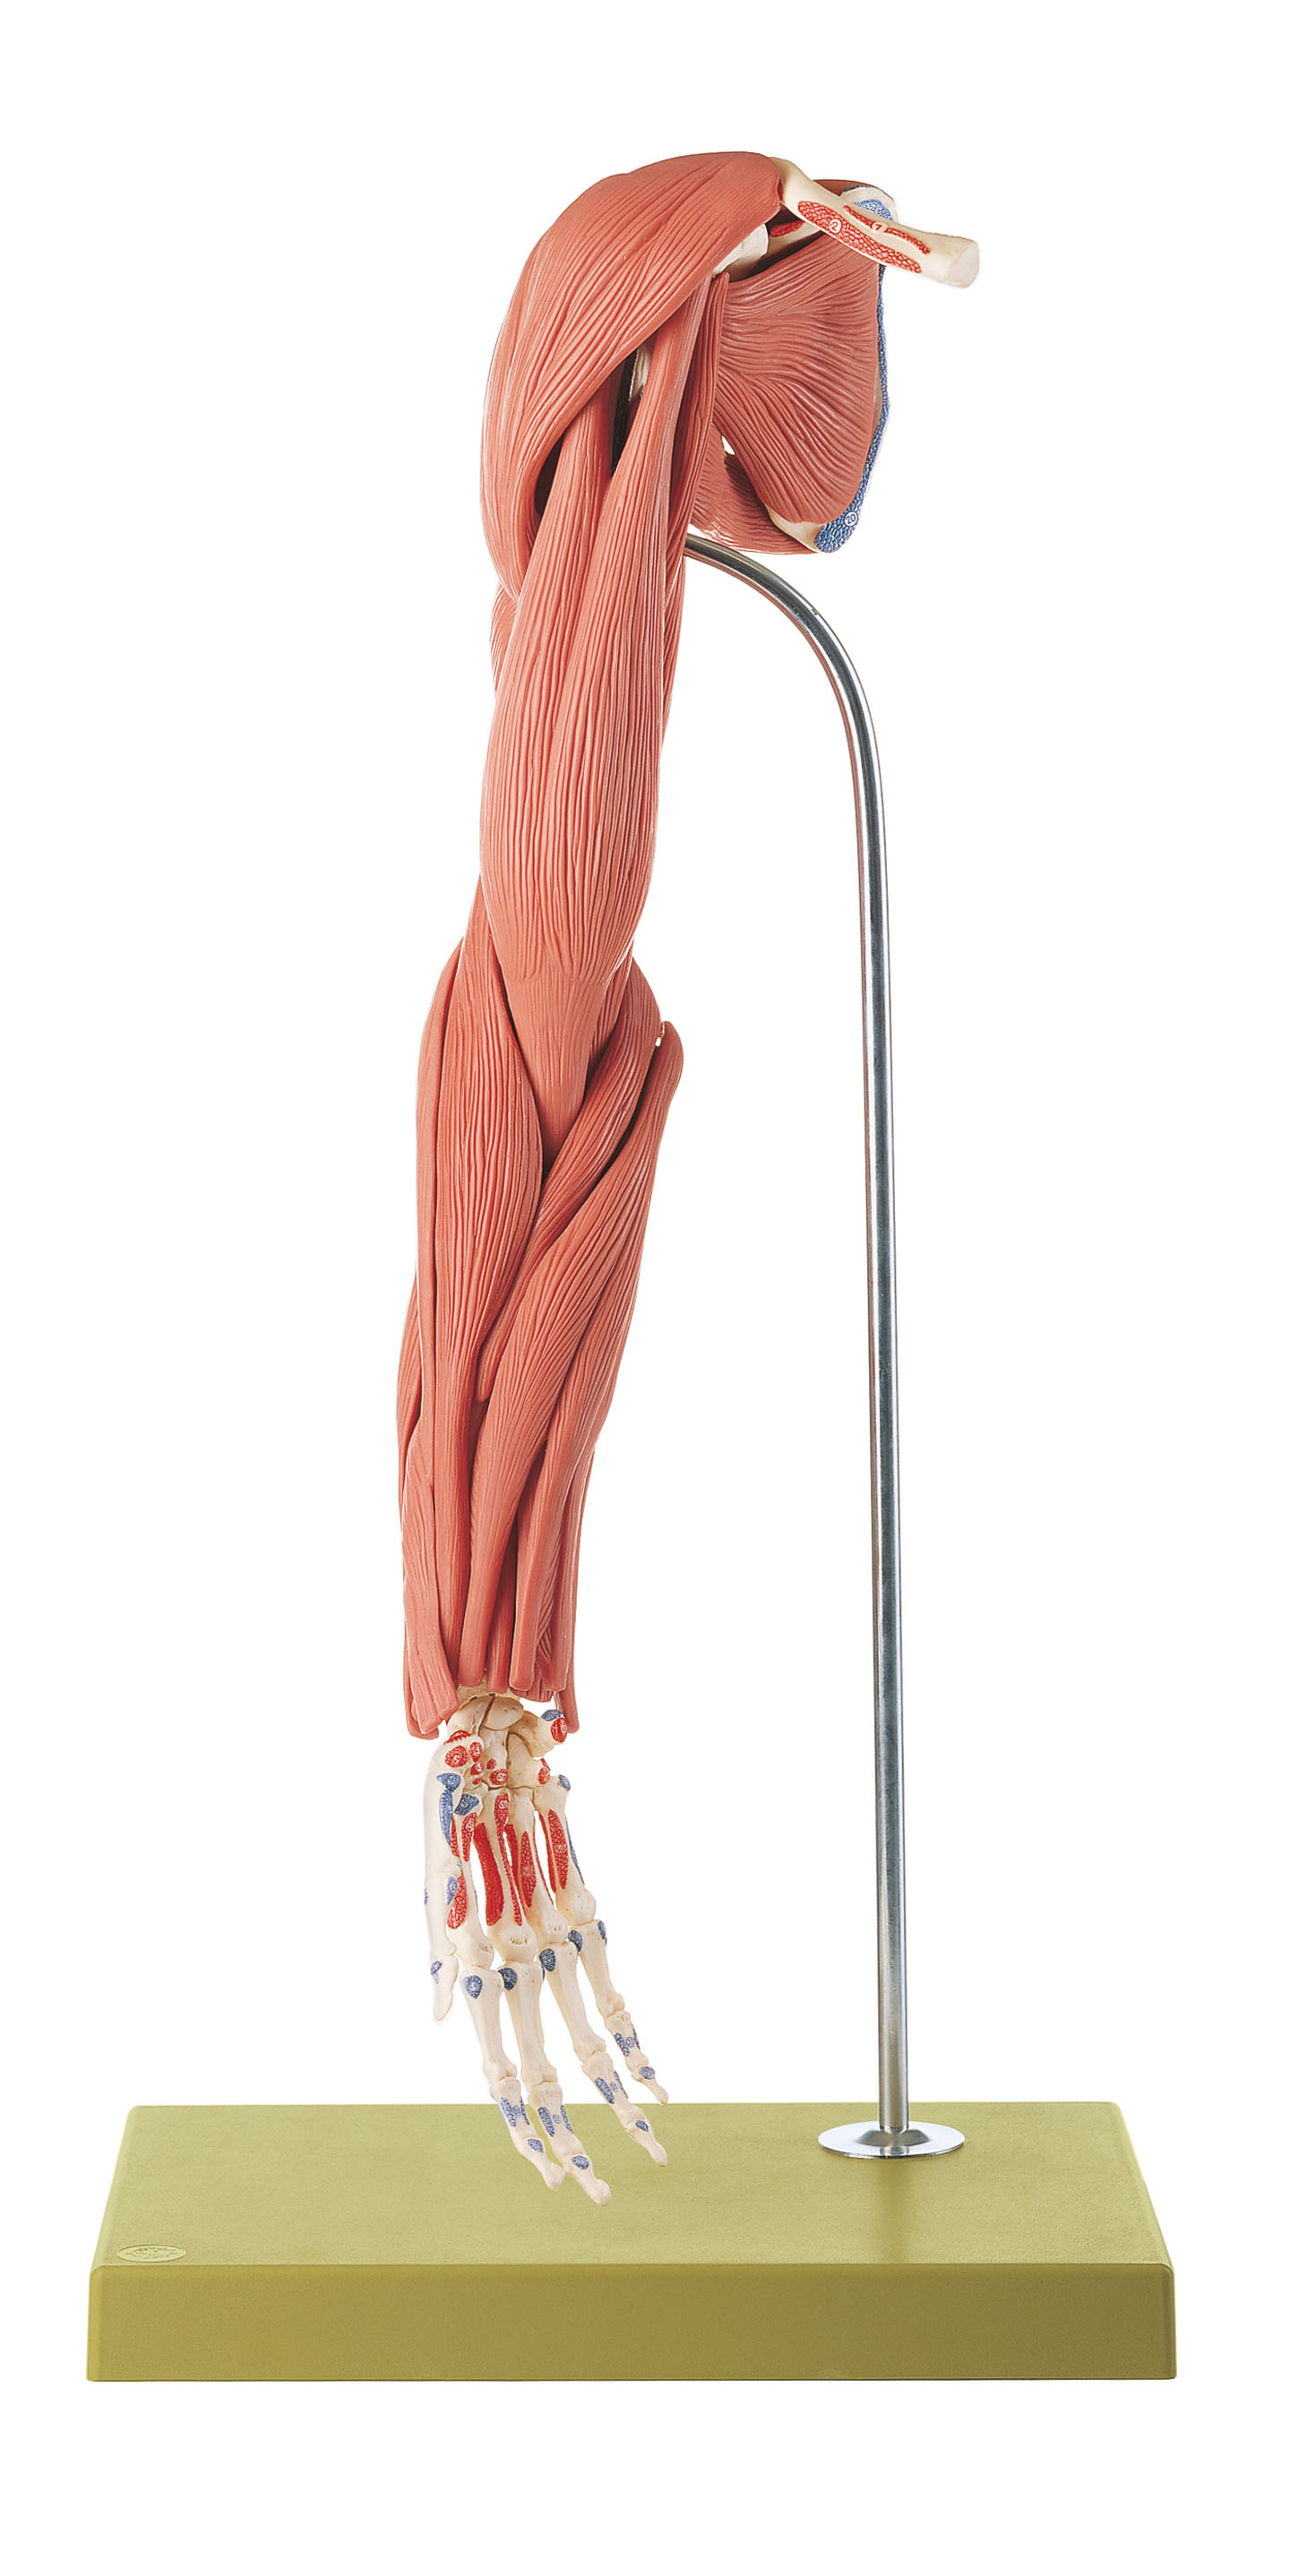 Model of the Arm Muscles – 24 Parts